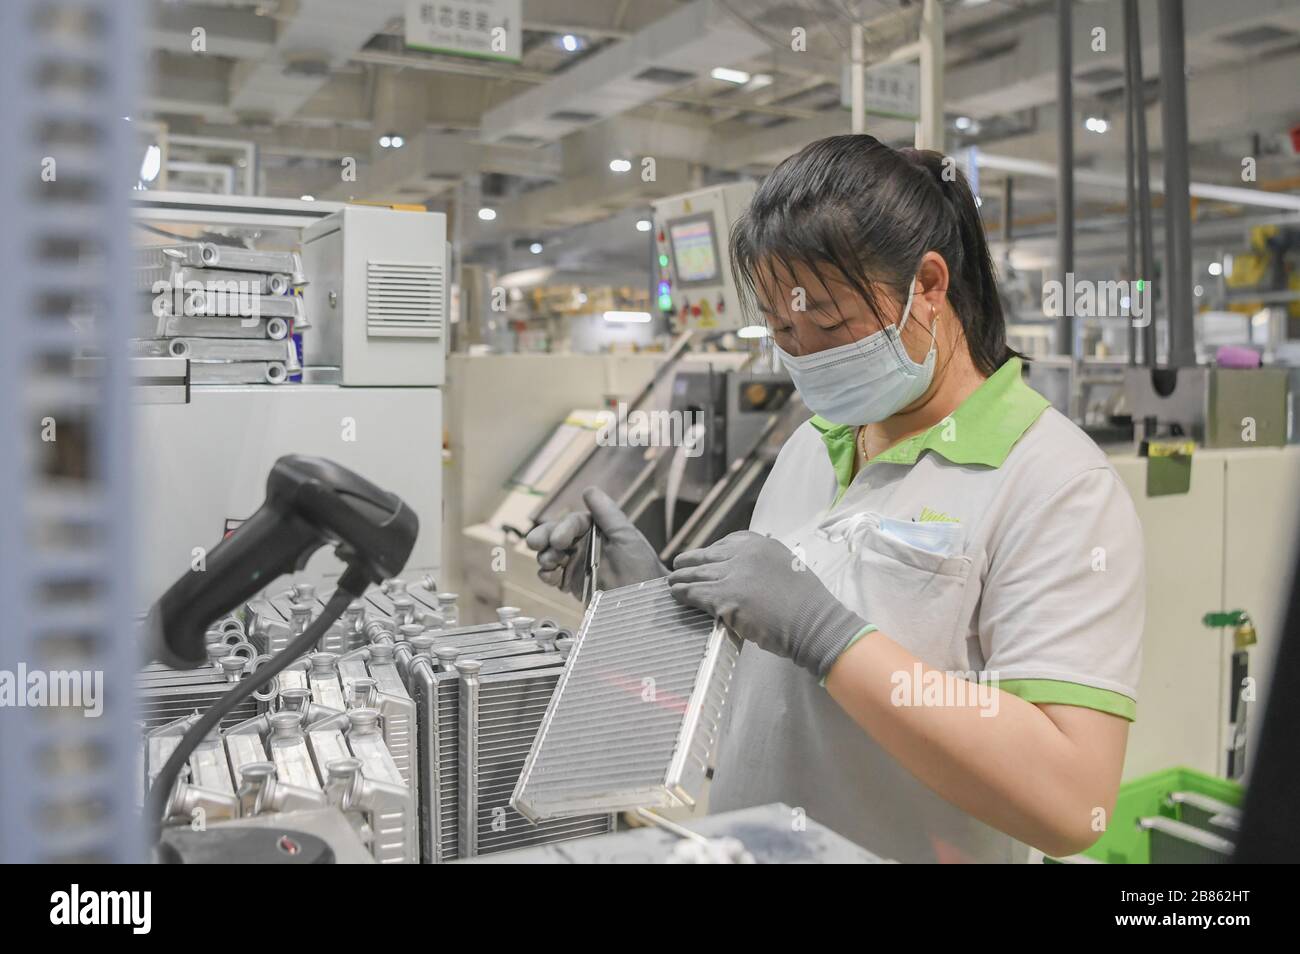 Wuhan, China's Hubei Province. 19th Mar, 2020. A staff member works on a production line at a company in Jingzhou, central China's Hubei Province, March 19, 2020. The Valeo Hubei company has resumed production since late February. Over 90% capacity of the company has recovered and over 80% staff members have returned to their work. Credit: Cheng Min/Xinhua/Alamy Live News Stock Photo